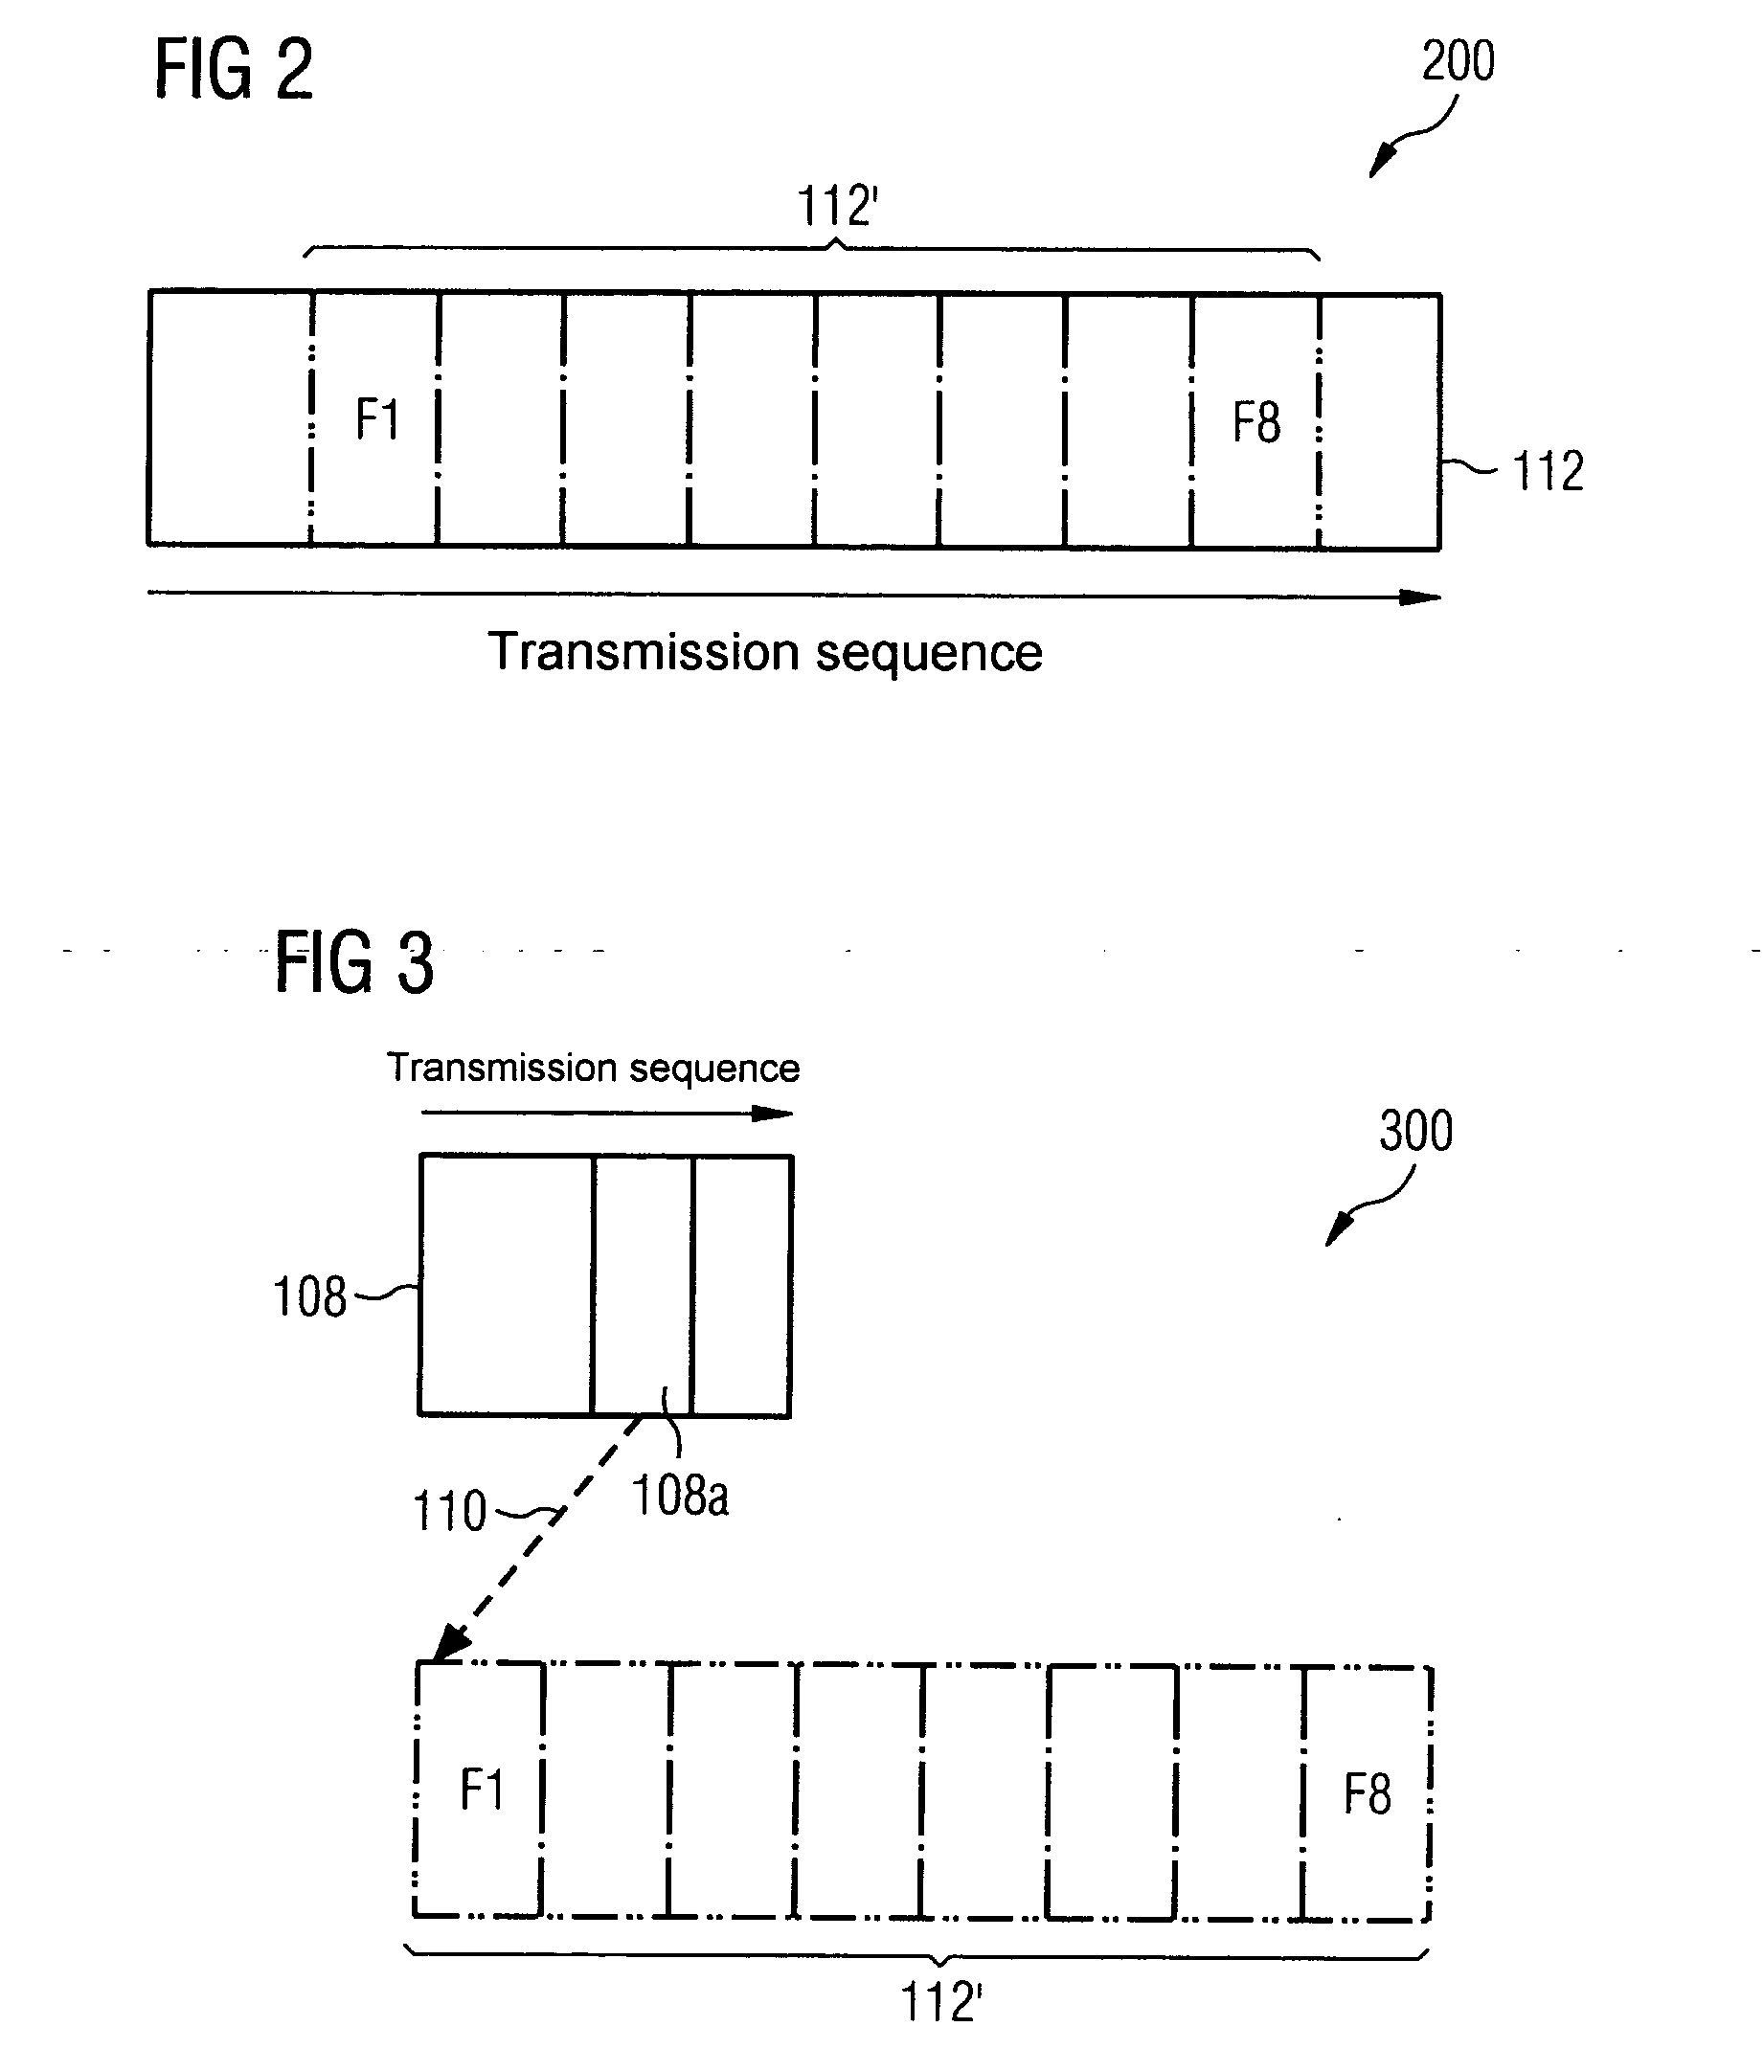 Storage and access method for an image retrieval system in a client/server environment